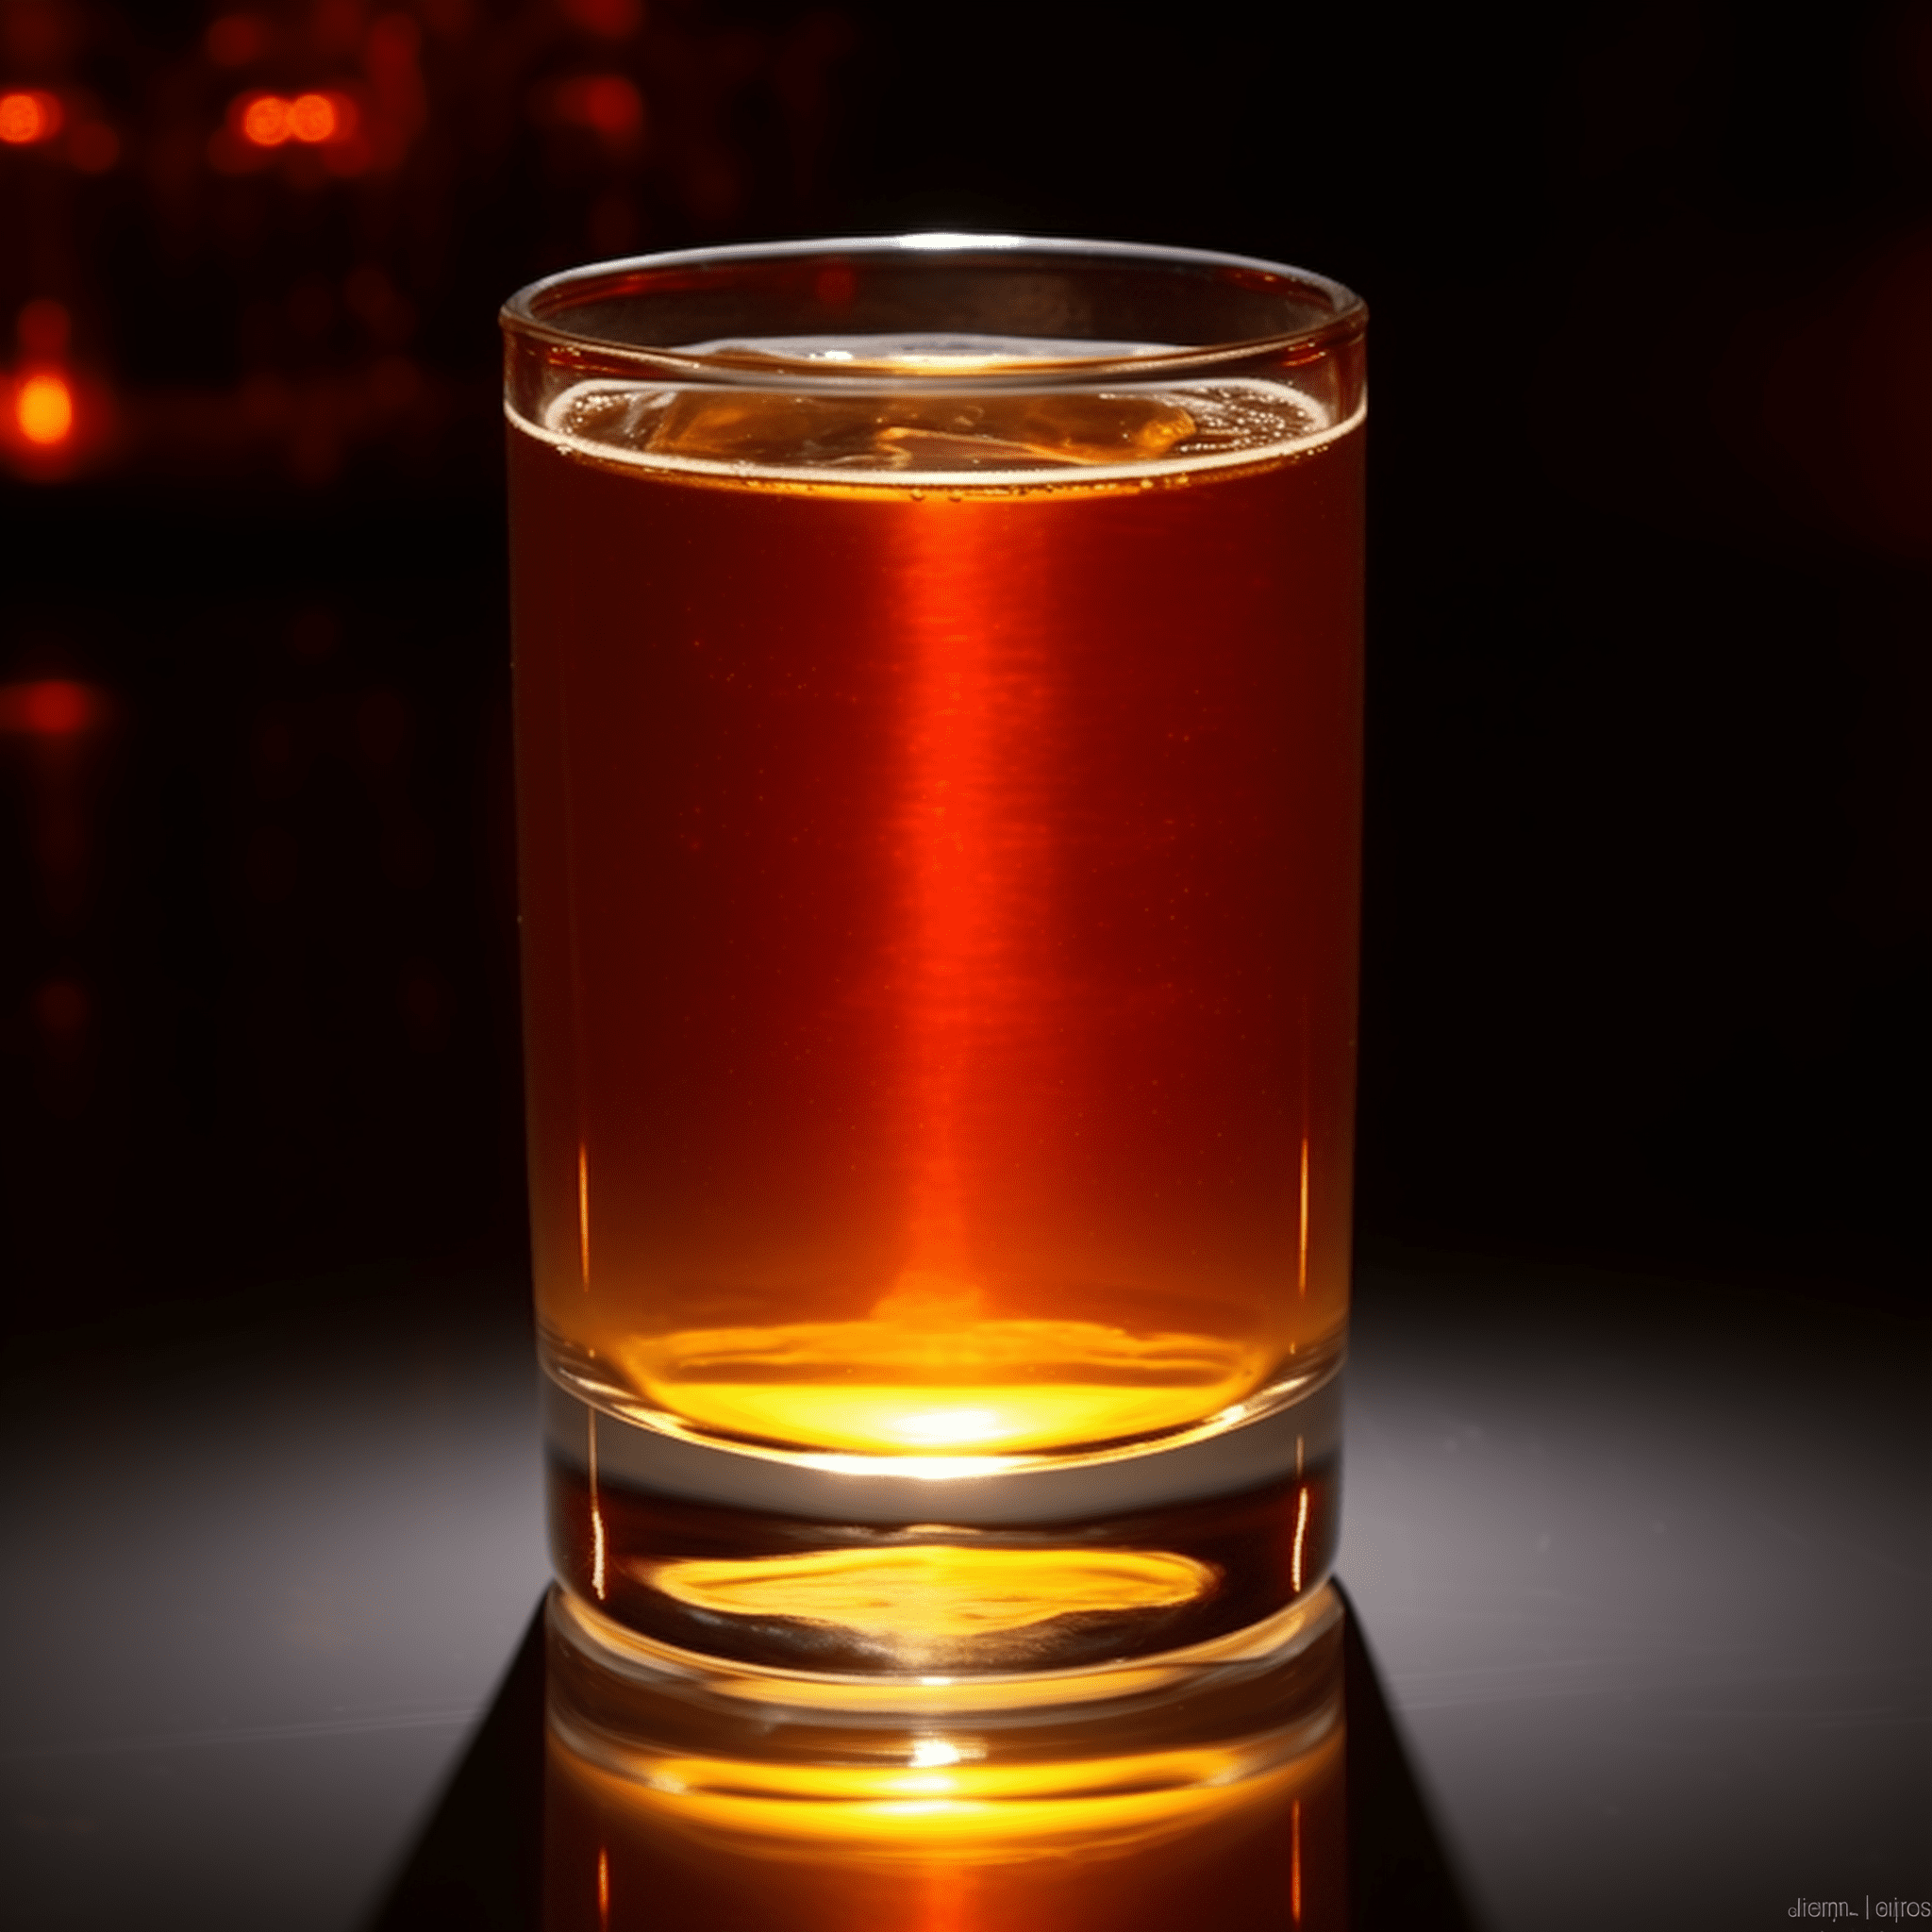 This shot is a fiery blend of strong flavors. It's robust, intense, and not for the faint-hearted. The combination of vodka, Jagermeister, Bacardi 151, and Wild Turkey Bourbon creates a complex taste that's predominantly spicy with a hint of sweetness from the lime.